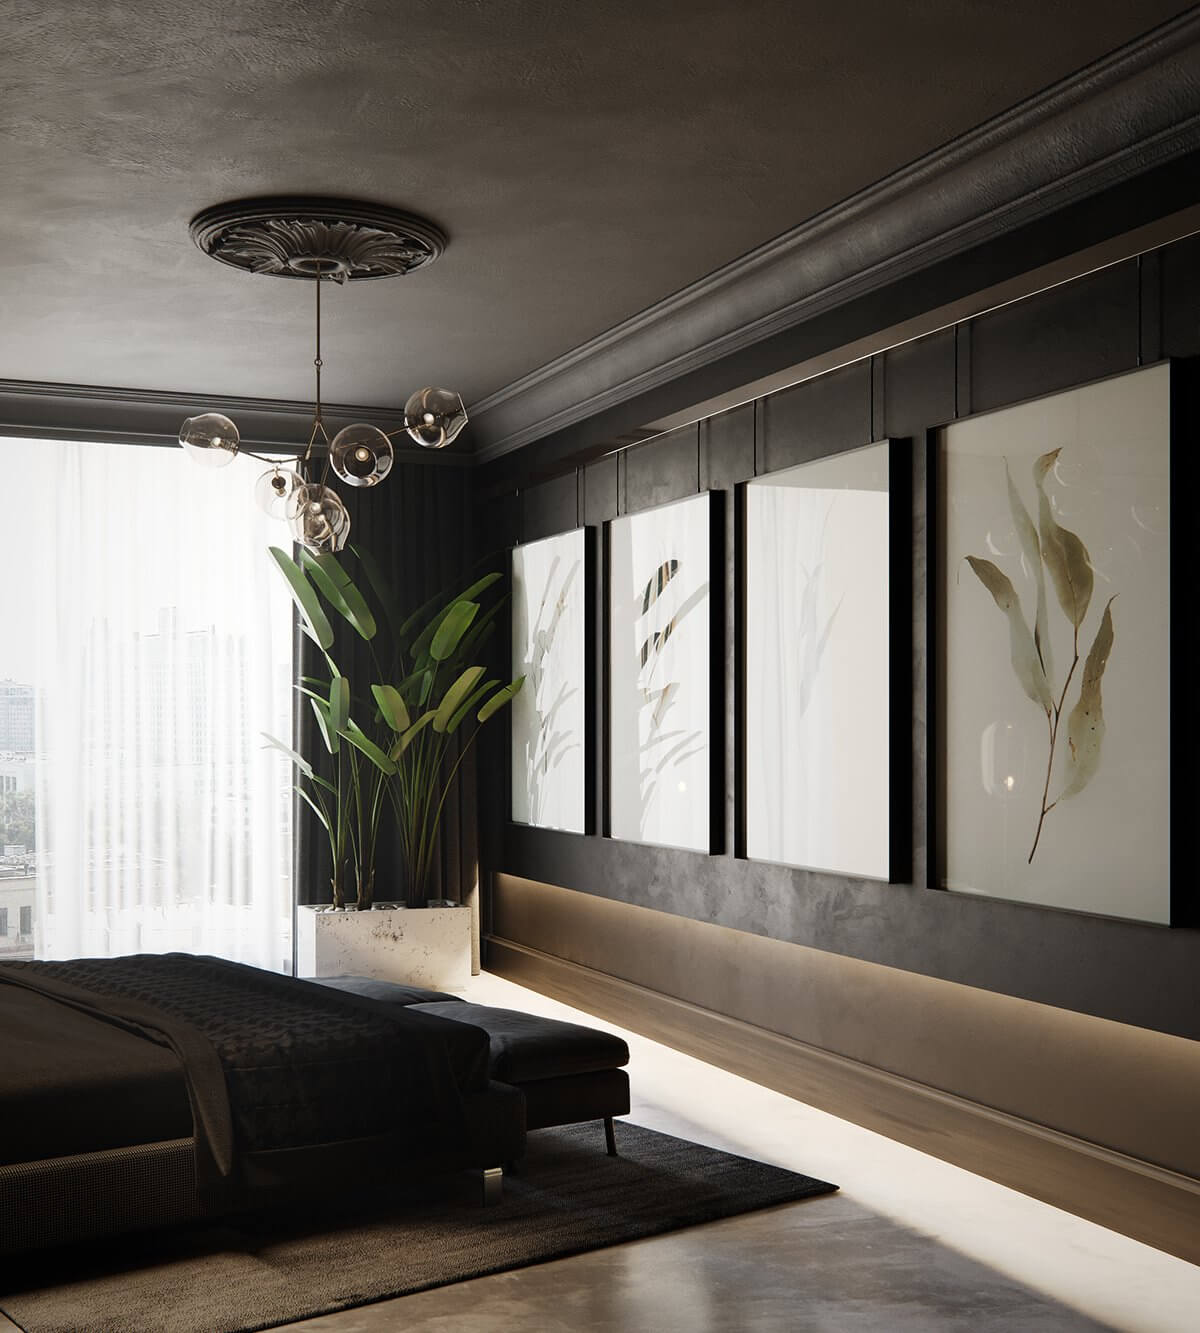 Moscow apartment bedroom picture wall - cgi visualization